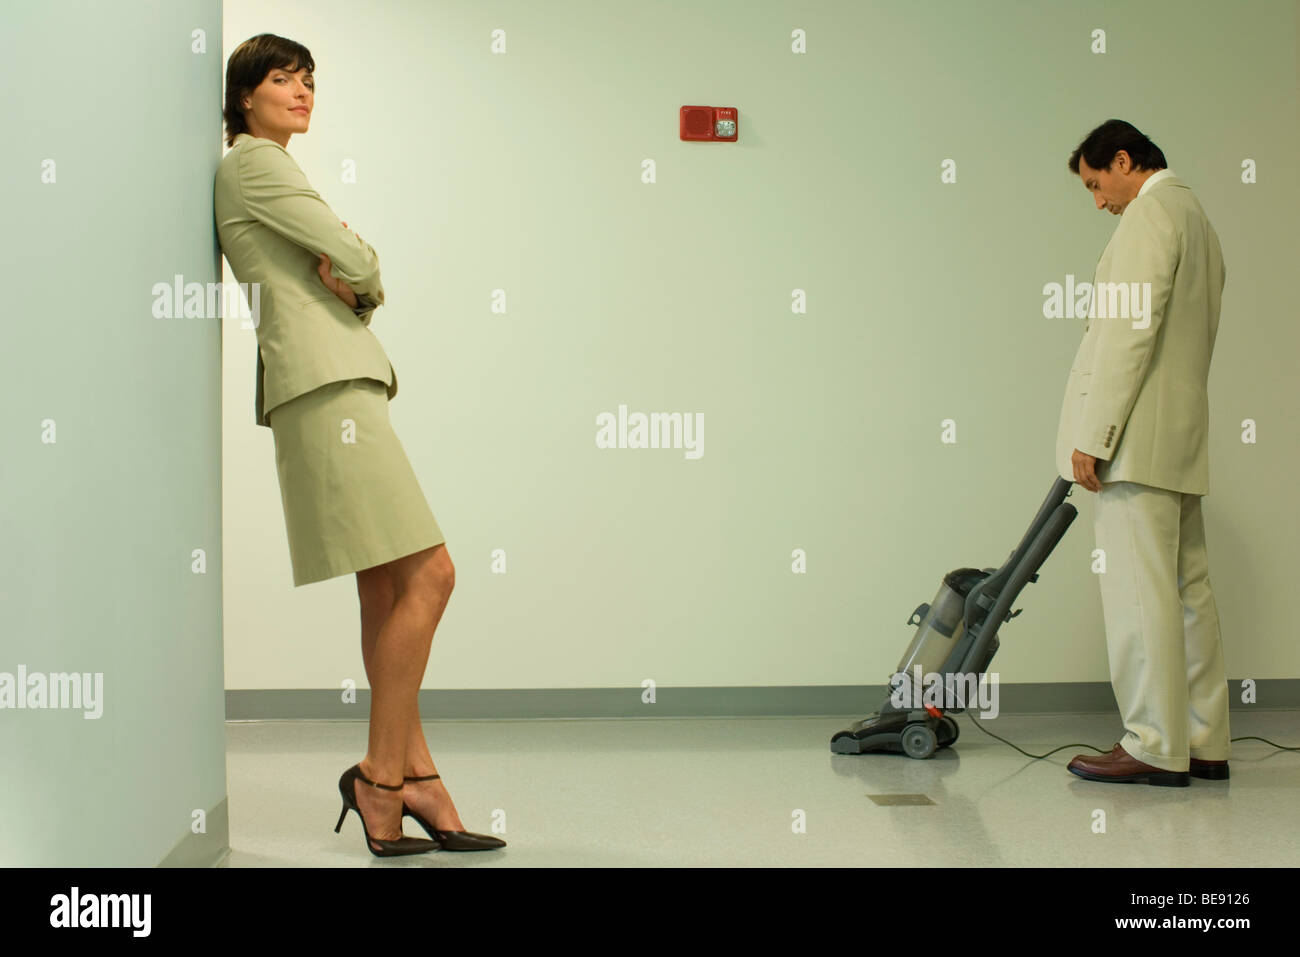 Well-dressed woman leaning against wall with arms folded, man vacuuming in background Stock Photo